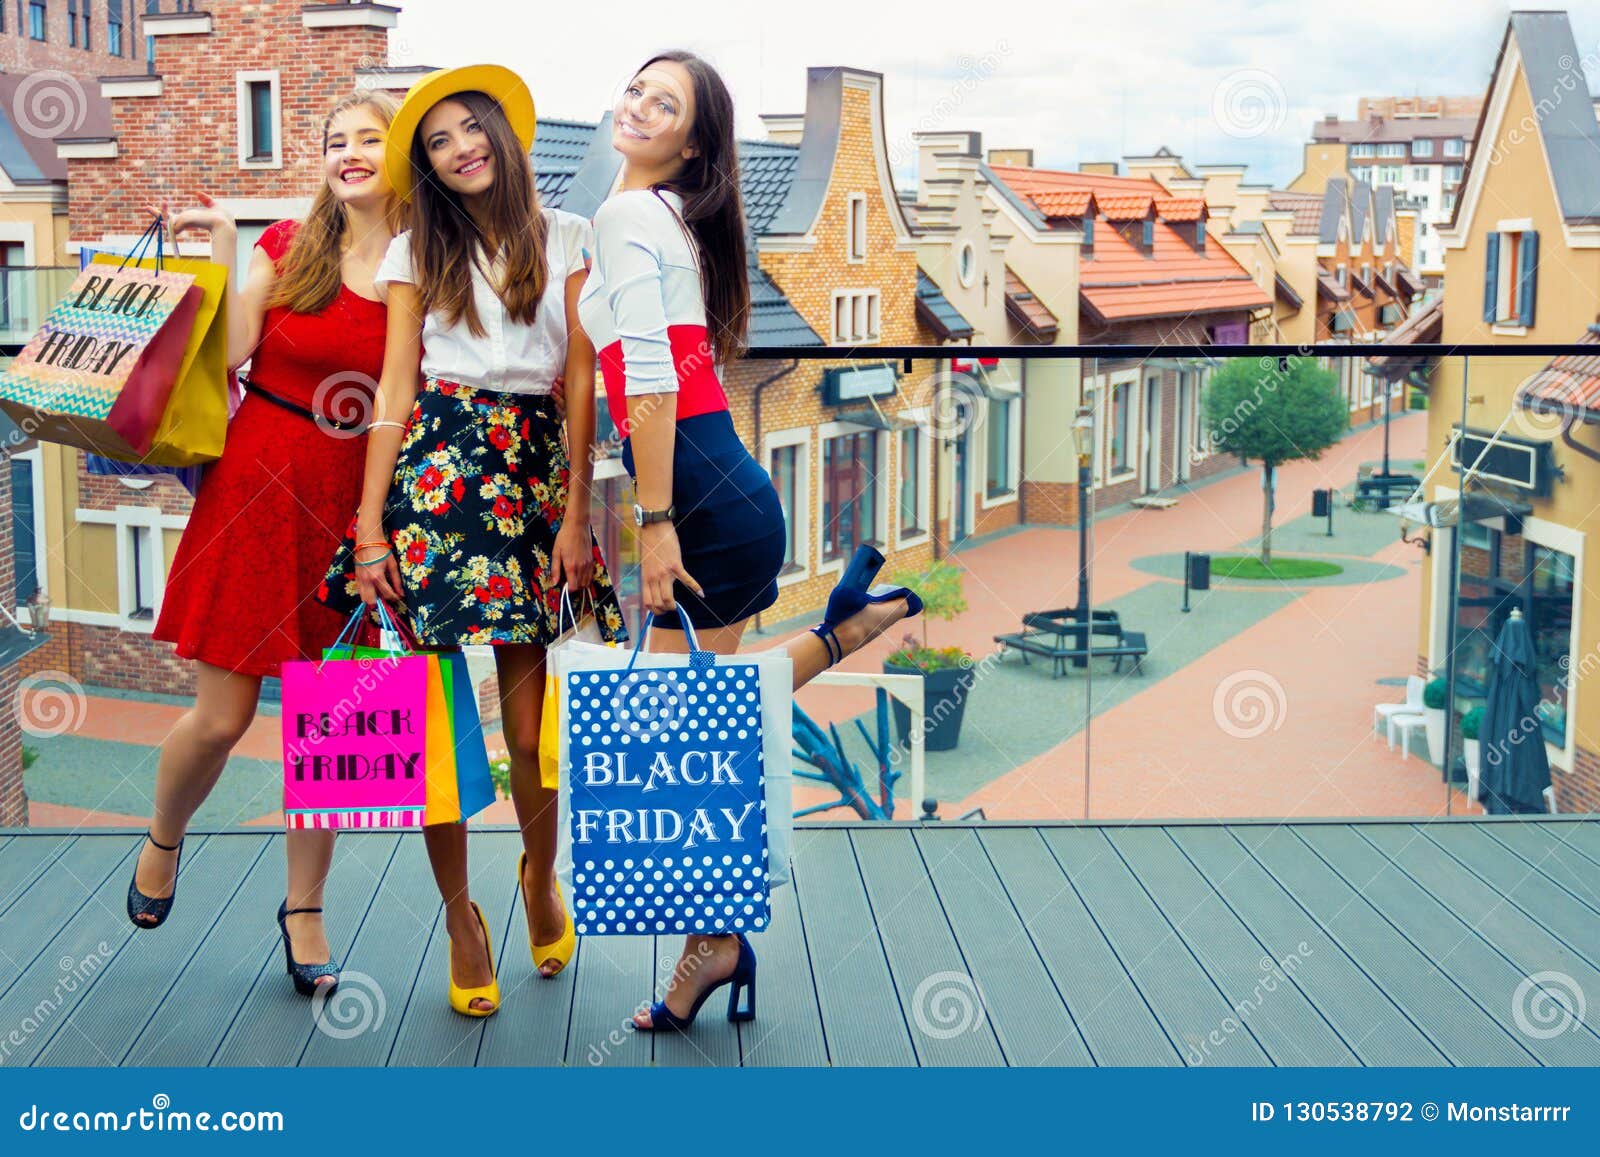 Hot girls at mall Friends Women N Shopping Mall Or Cloth Store Stock Photo Image Of Fashion Market 130538792